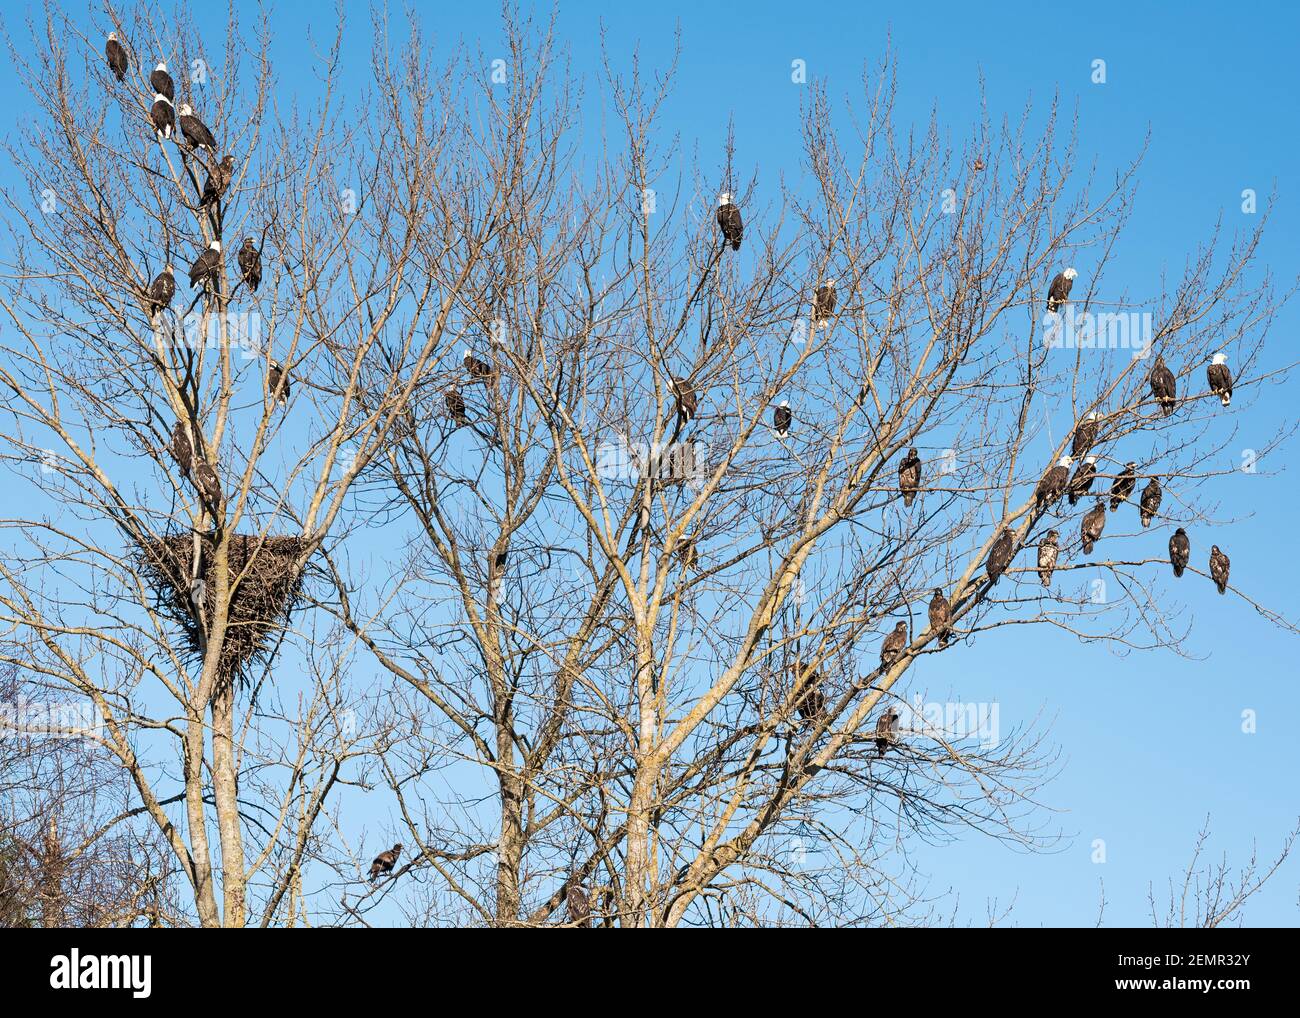 Bald Eagles gather in large number in a winter tree at Edison in the Skagit Valley in Washington State after feeding on salmon in the nearby rivers Stock Photo